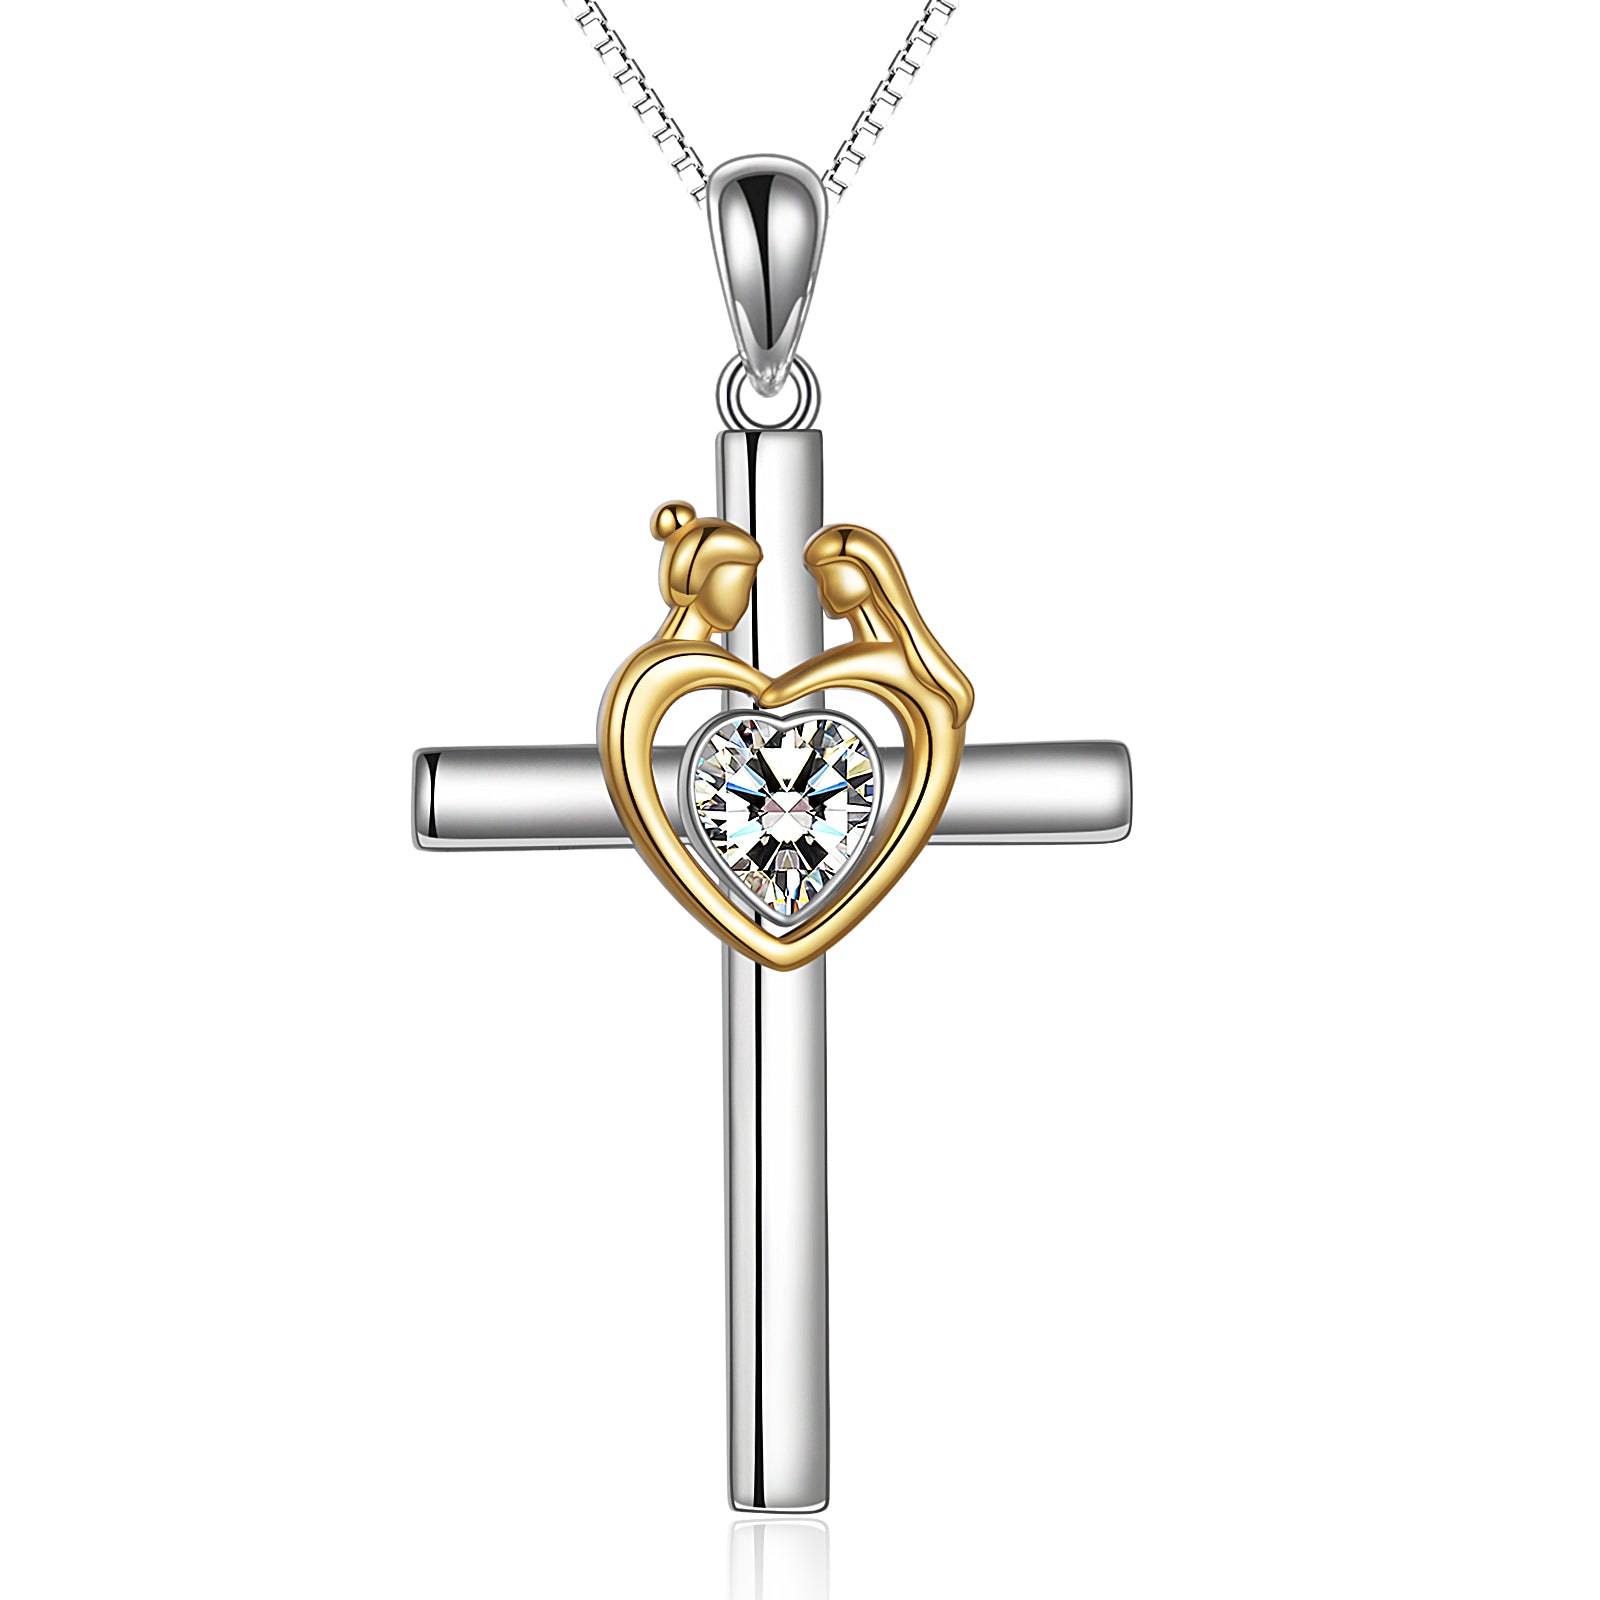 Best Friend Sterling Silver Religious Engraved Cross Pendant Necklace Jewelry